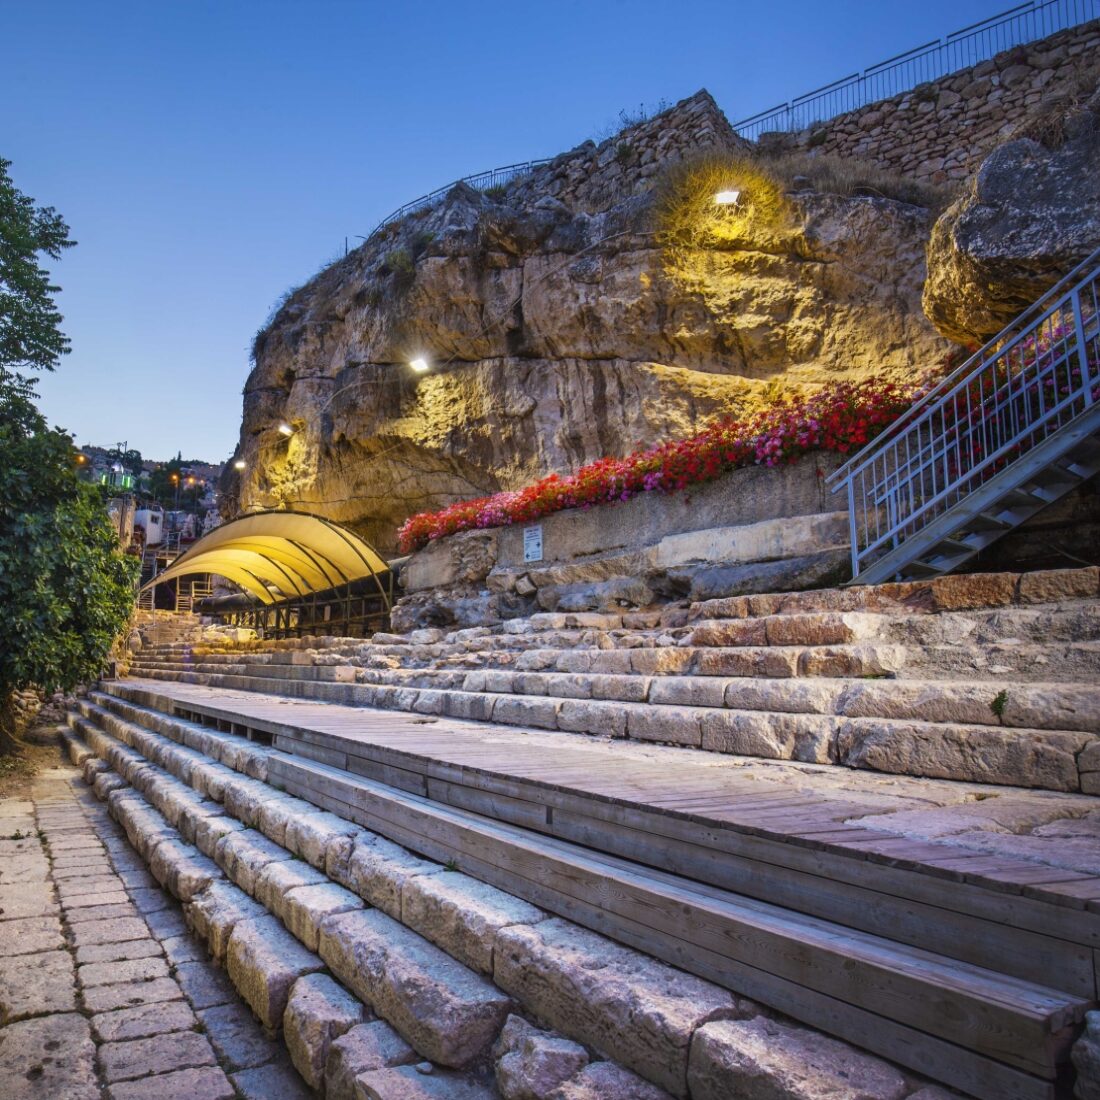 The northern perimeter of the Pool of Siloam. Photo by Koby Harati/City of David Archives